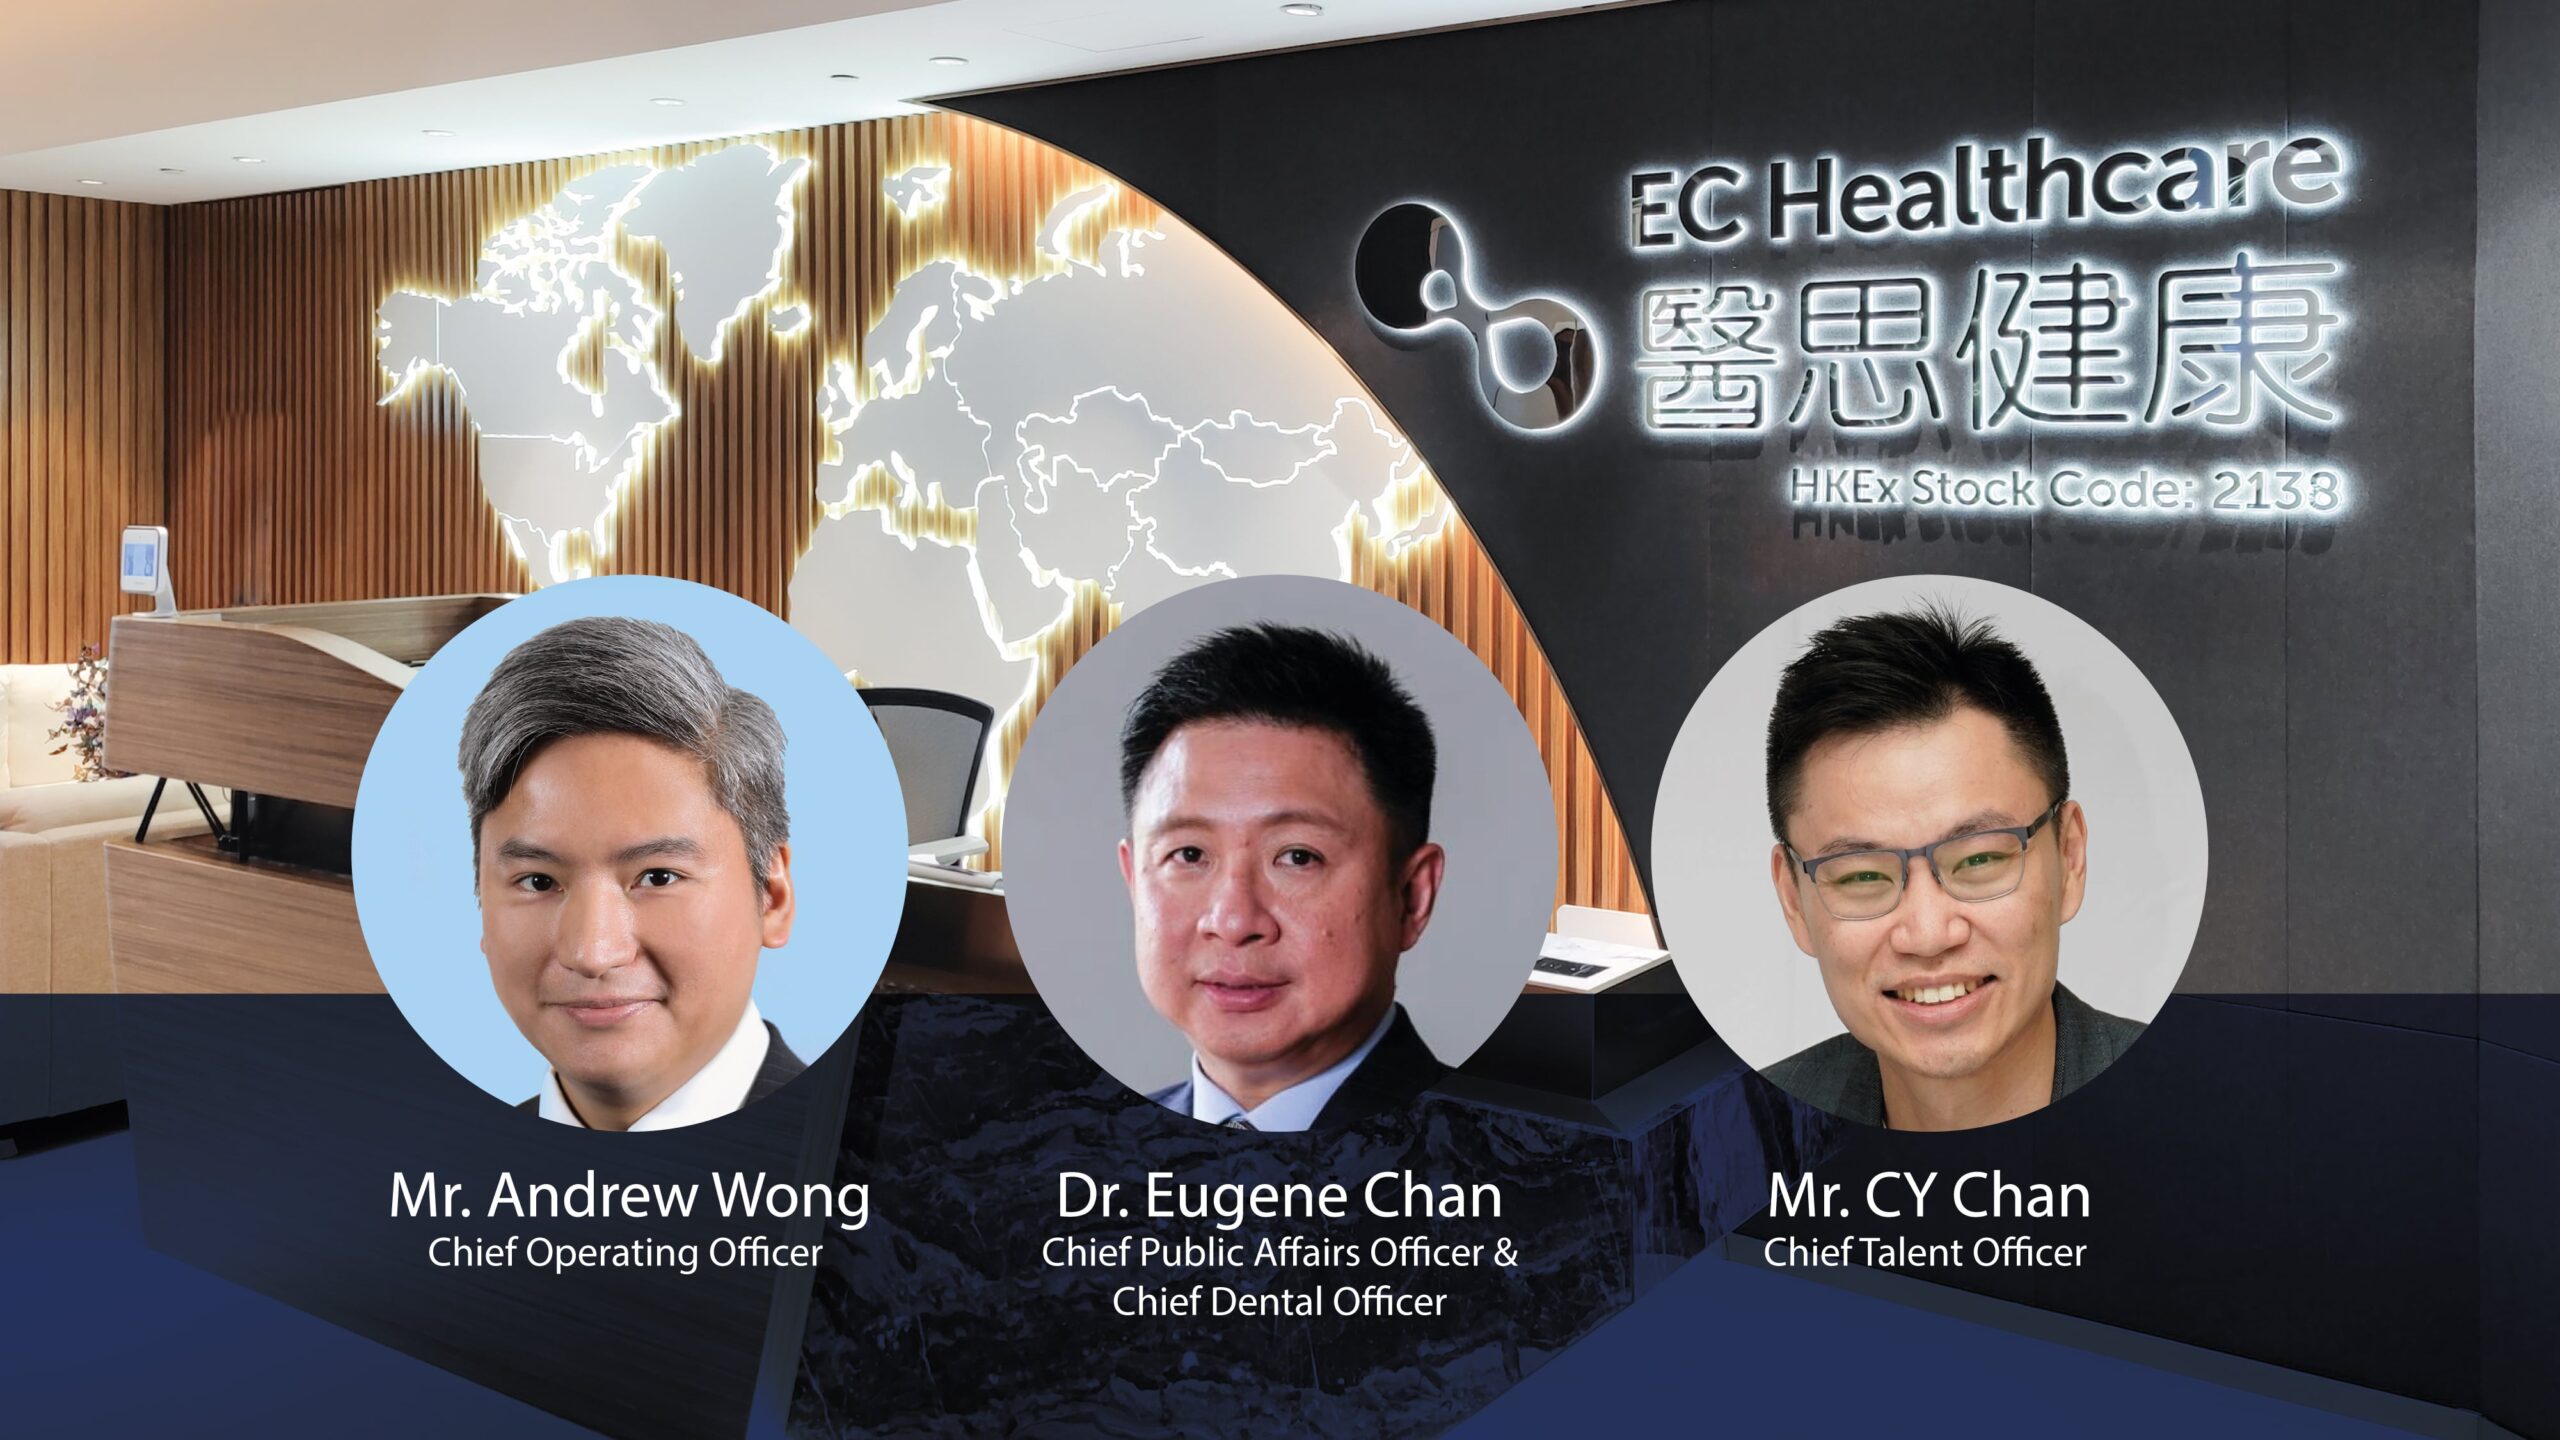 EC Healthcare Appoints Chief Operating Officer, Chief Public Affairs Officer & Chief Dental Officer and Chief Talent Officer Further Expansion in Senior Management Team Empowering the Group to Achieve High Quality Growth